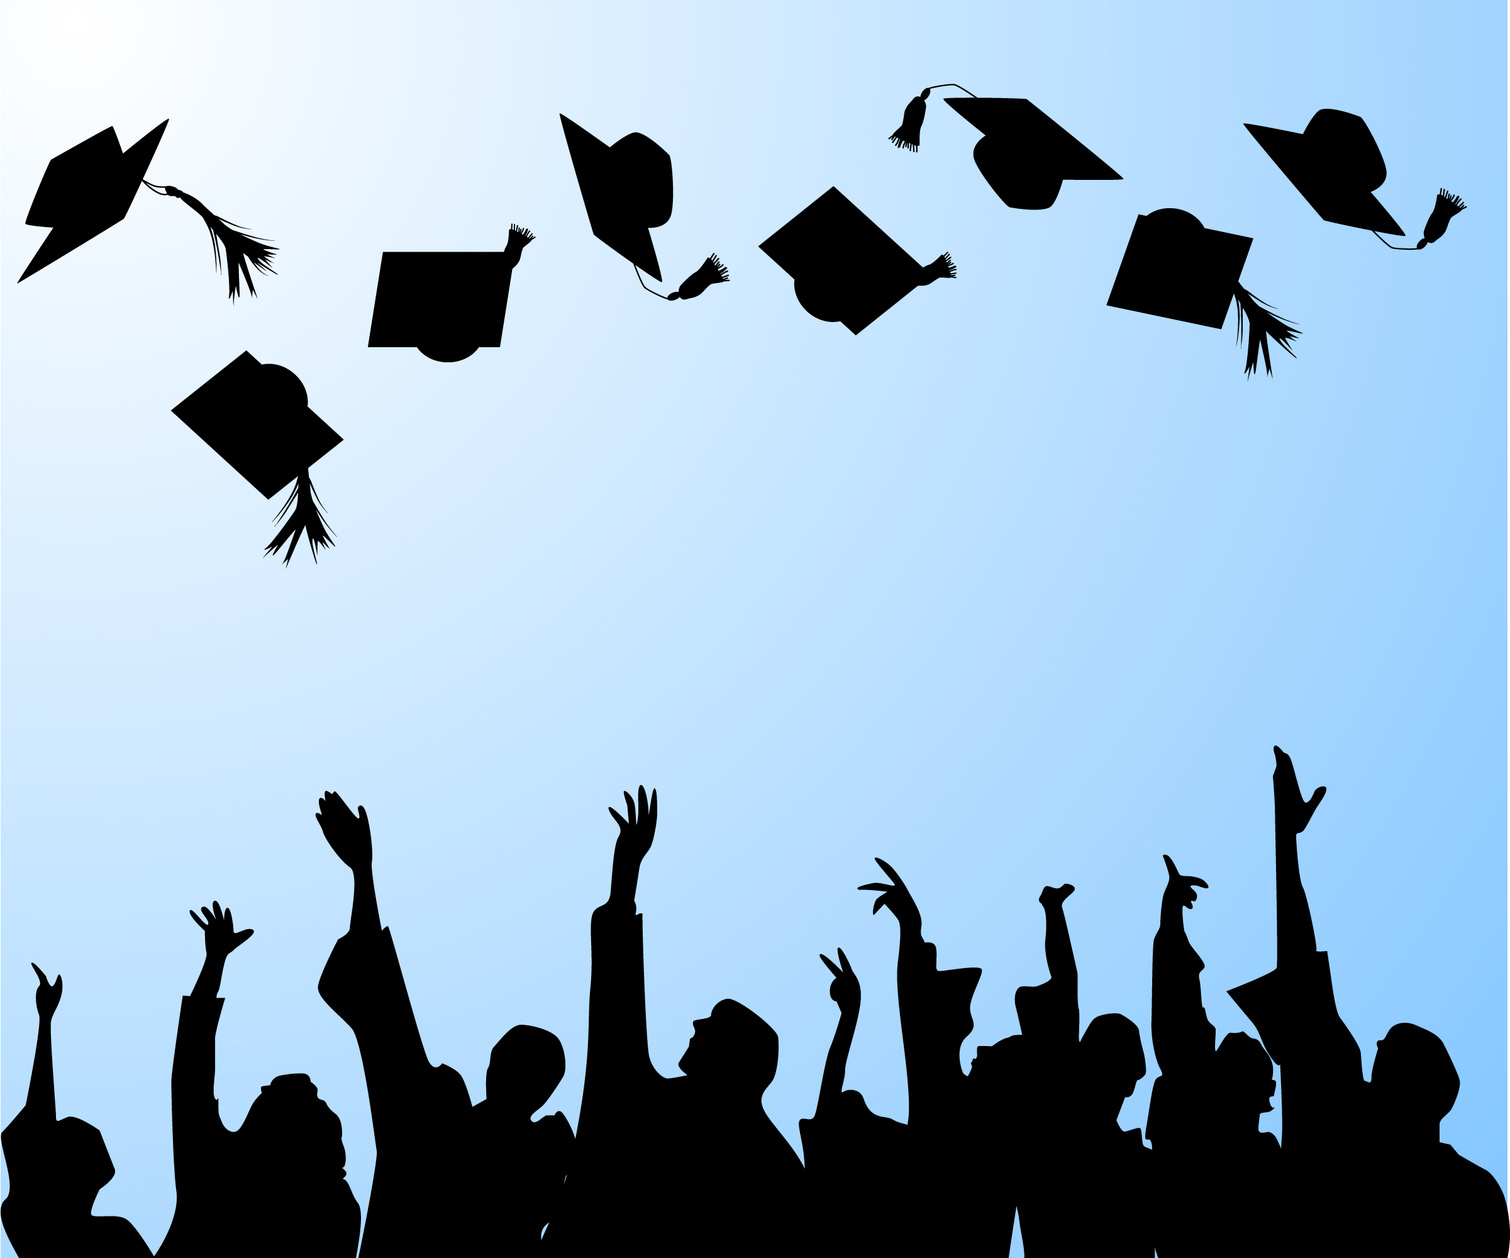 Free Graduation University Backgrounds For PowerPoint   Education PPT